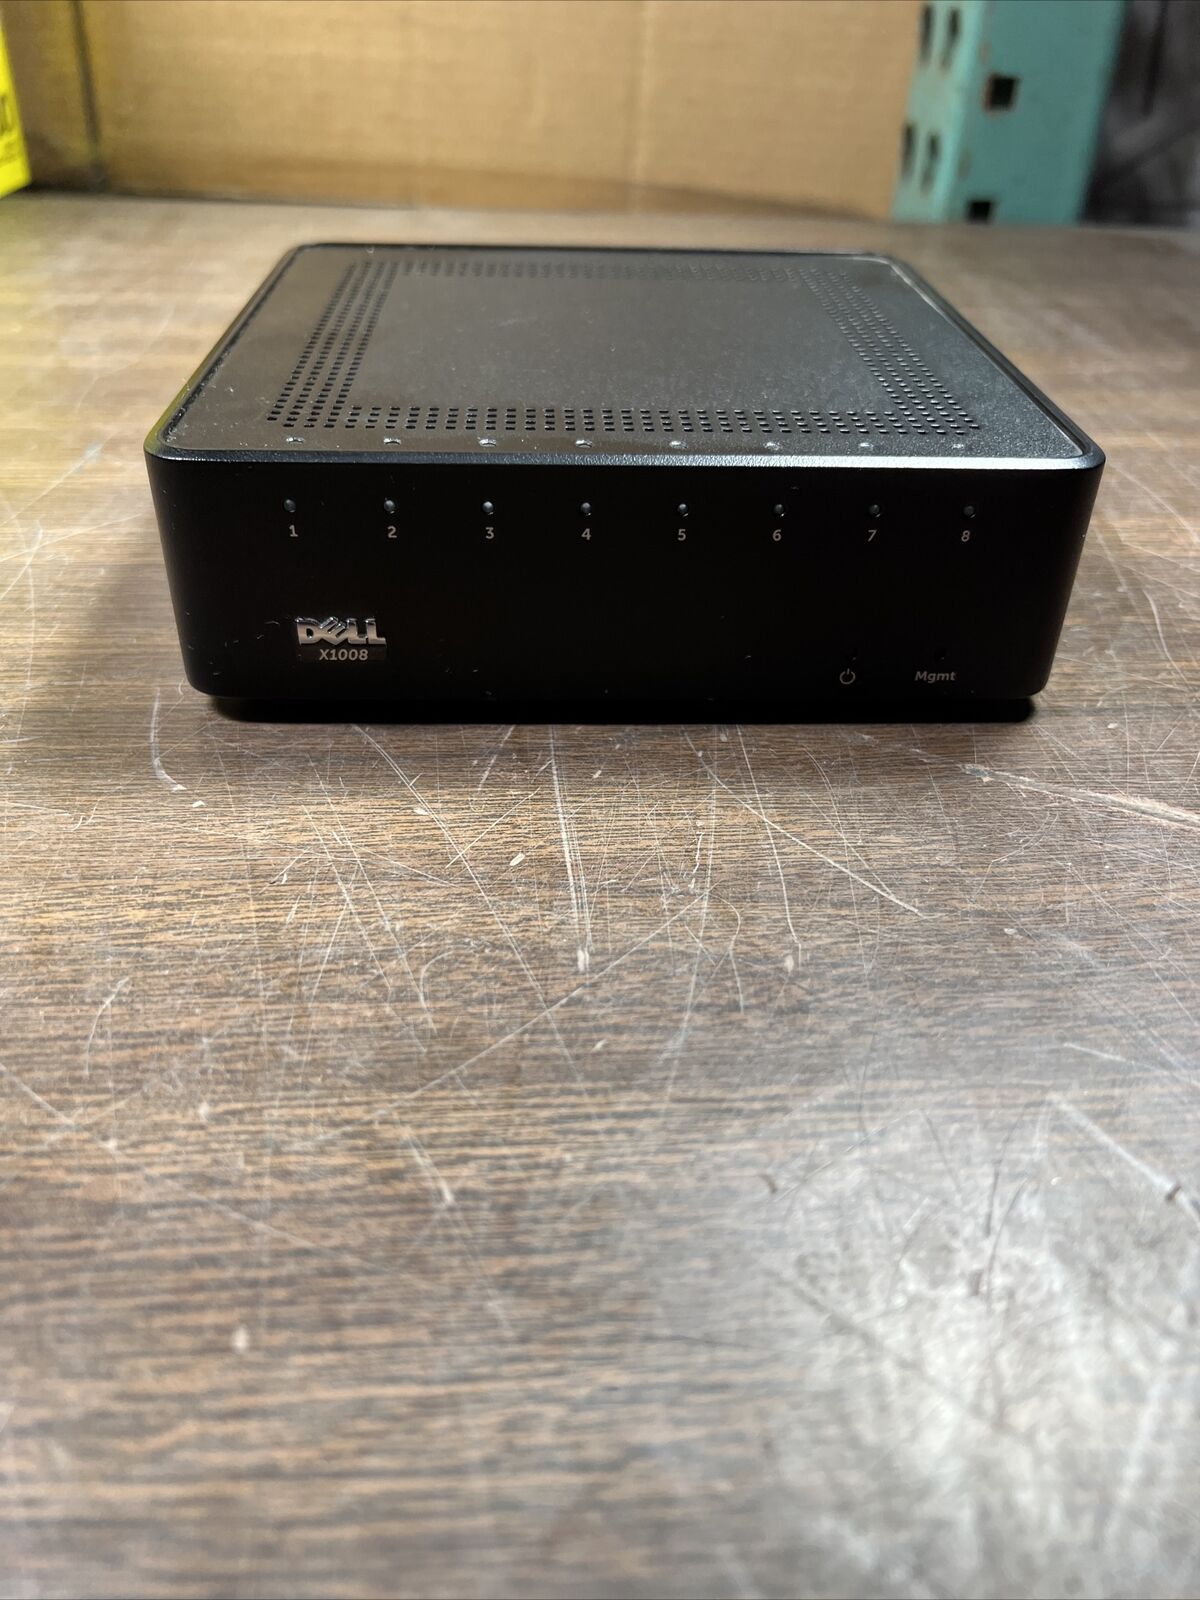 DELL Z1008 E08W 8-PORT MANAGED ETHERNET NETWORK SWITCH